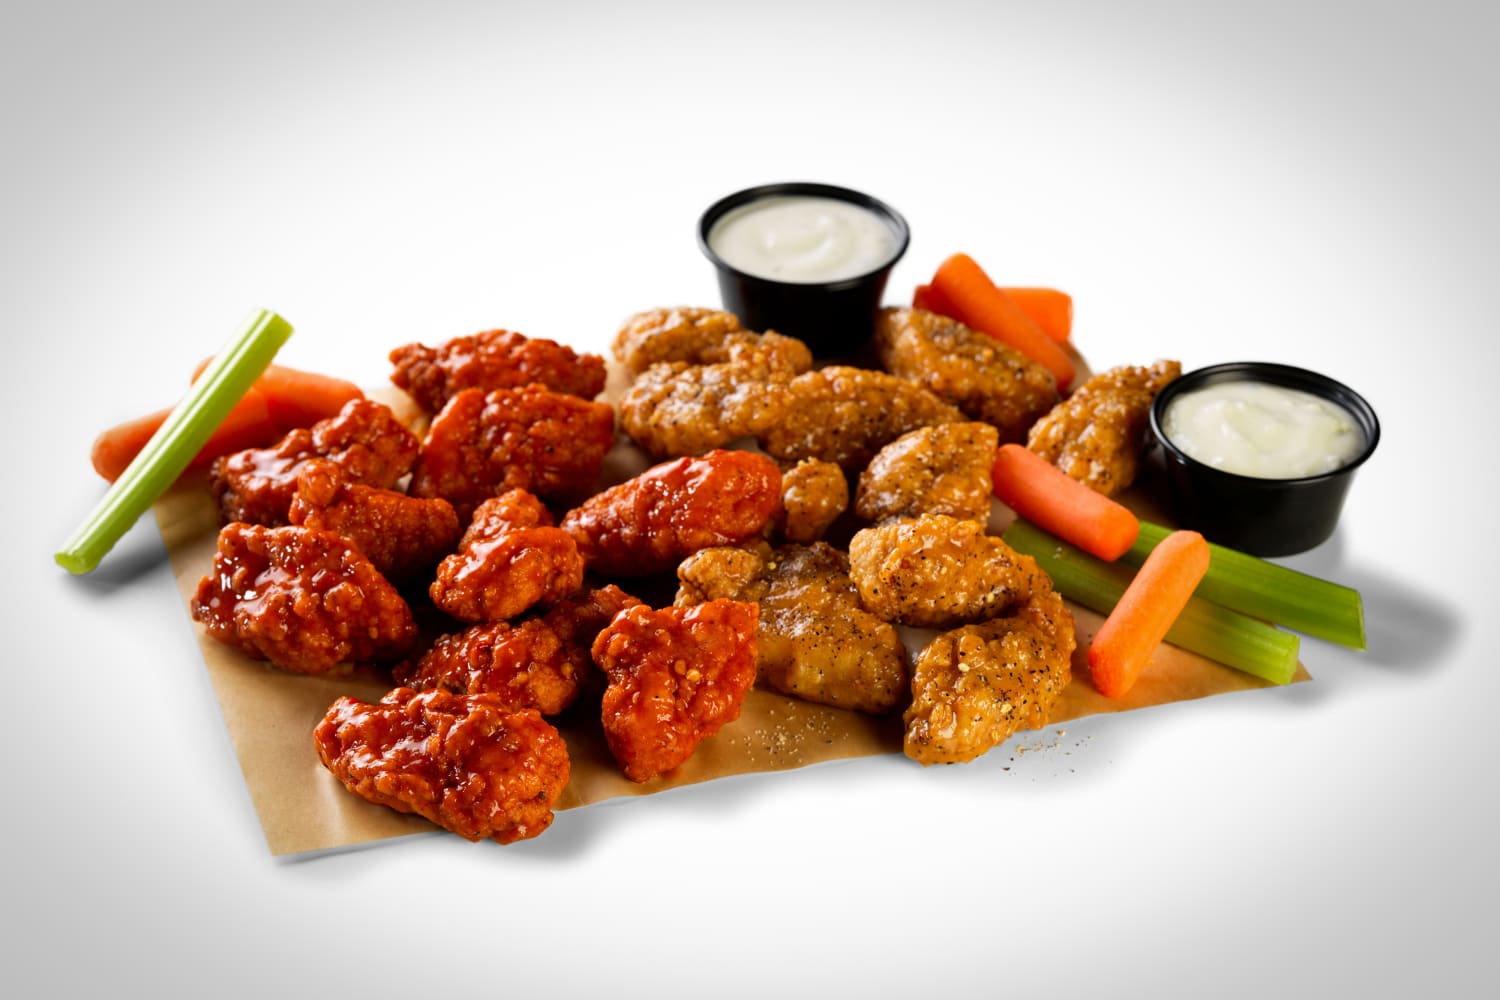 Man sues Buffalo Wild Wings, saying 'boneless wings' are actually just chicken nuggets